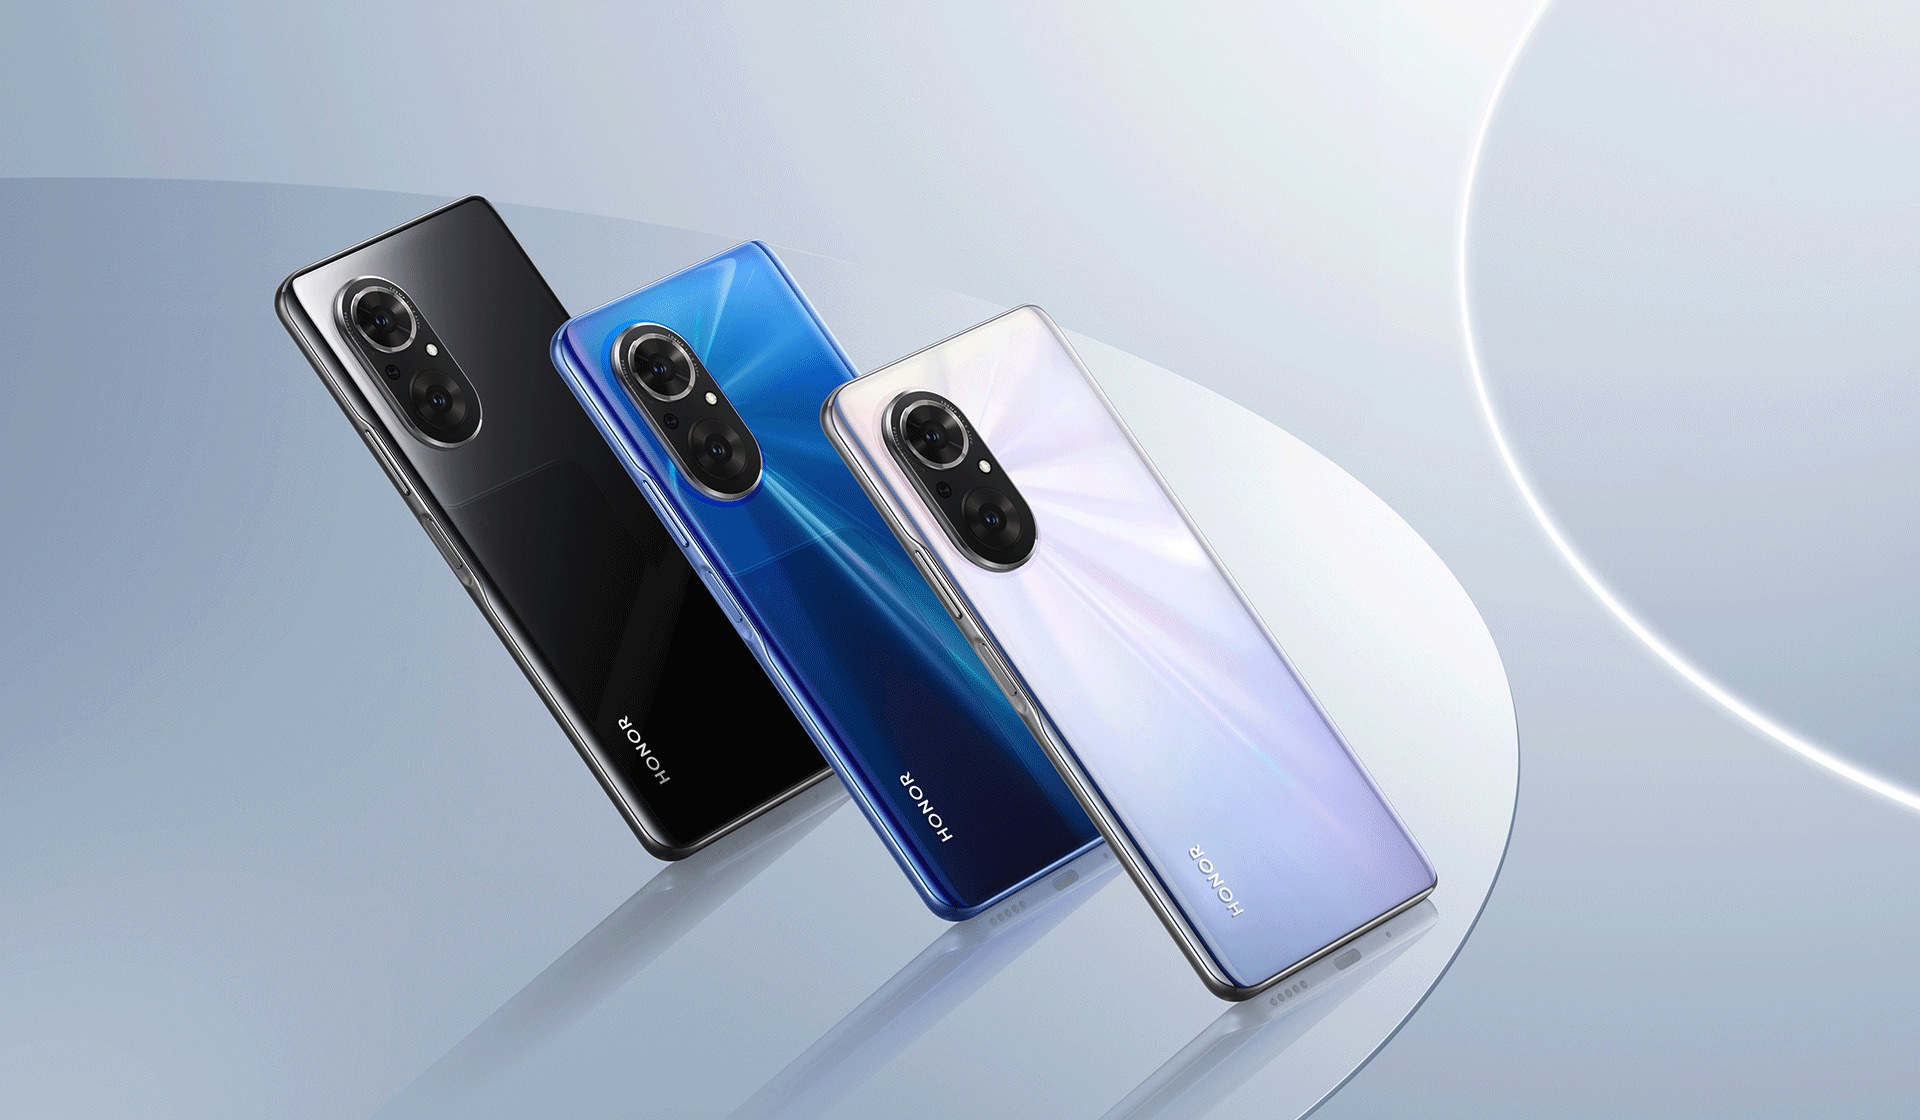 HONOR cell phone is copied to the next Huawei smartphone